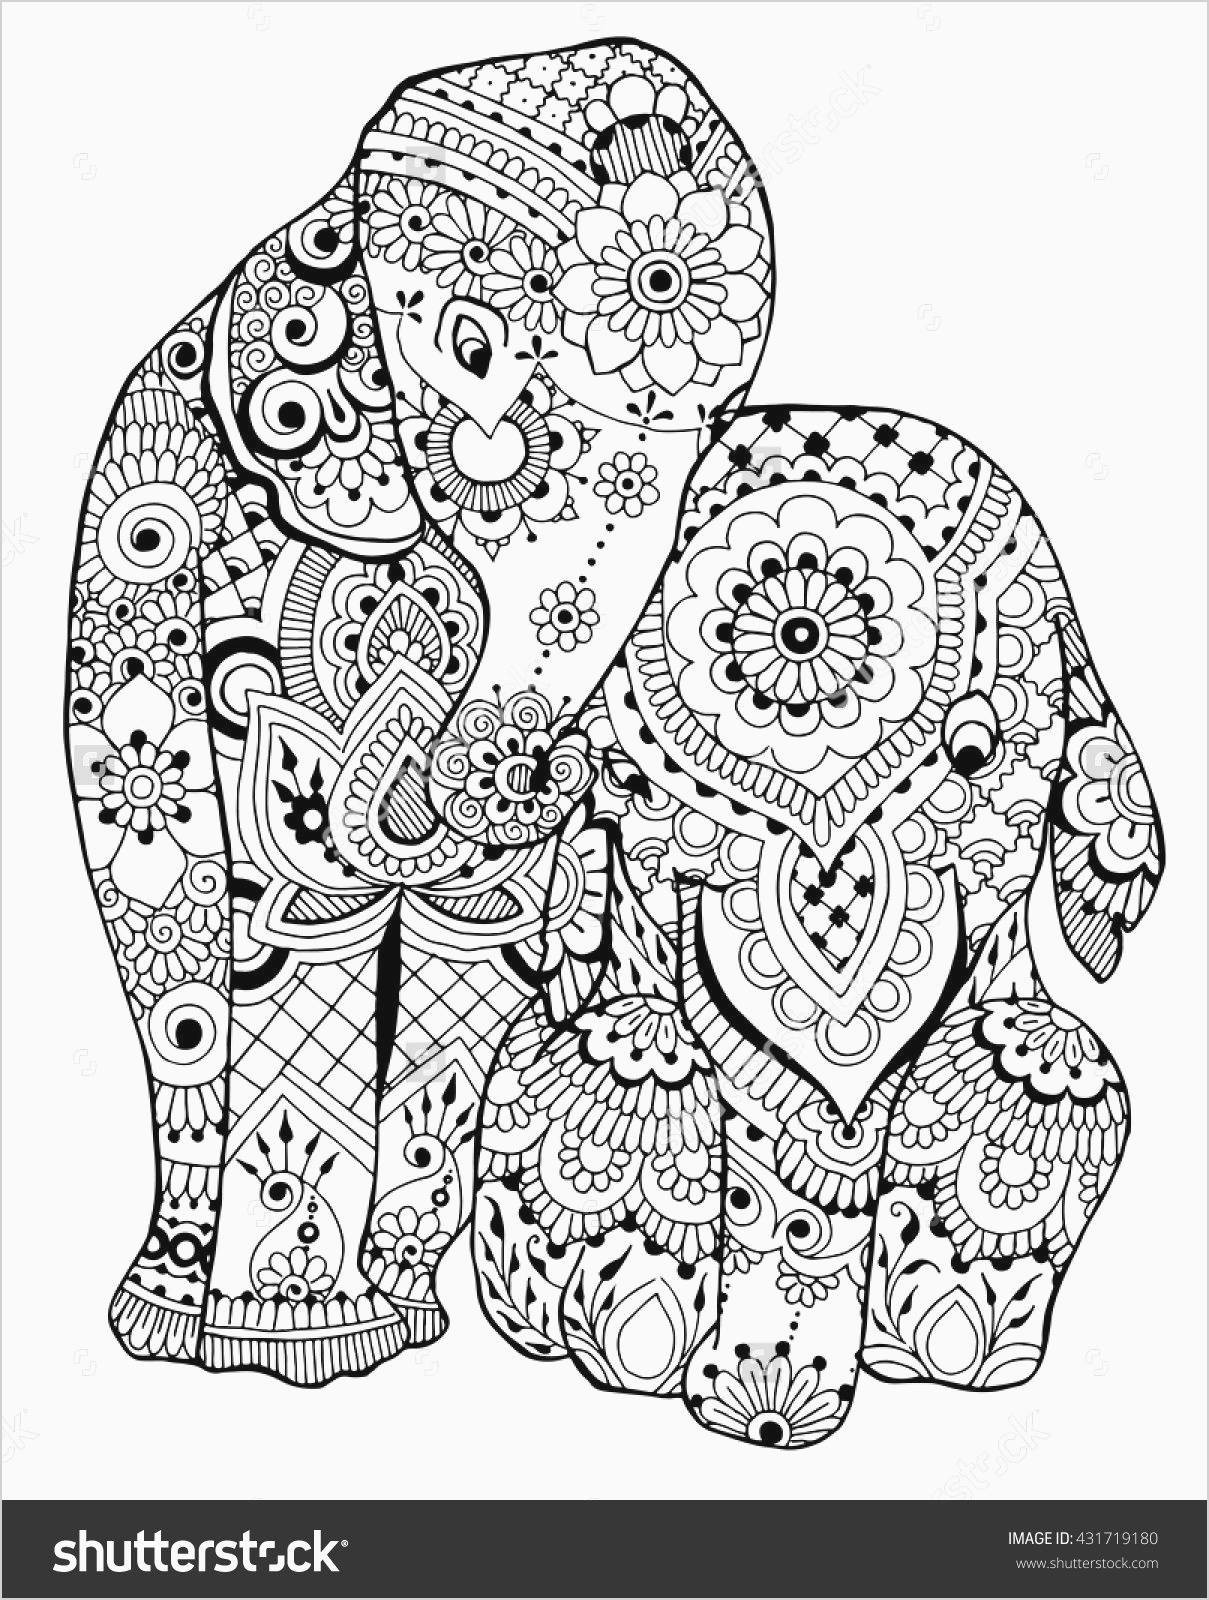 Drawings Of Elephant Eyes A Free Collection Of 49 Elephant Coloring Pages Download them